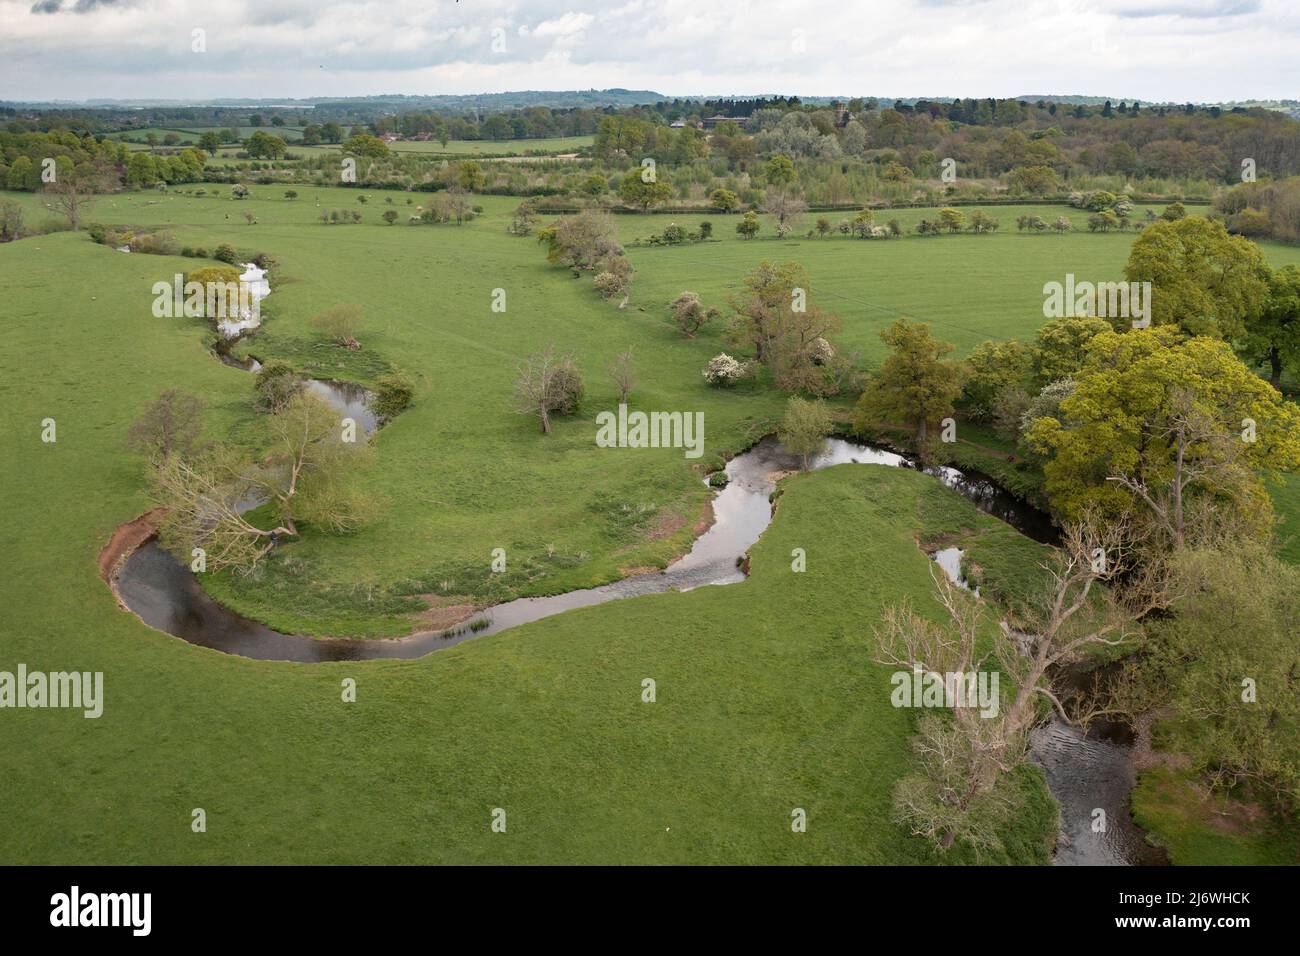 Aerial view of the twisting river Arrow running through farm land in Warwickshire, England. Stock Photo